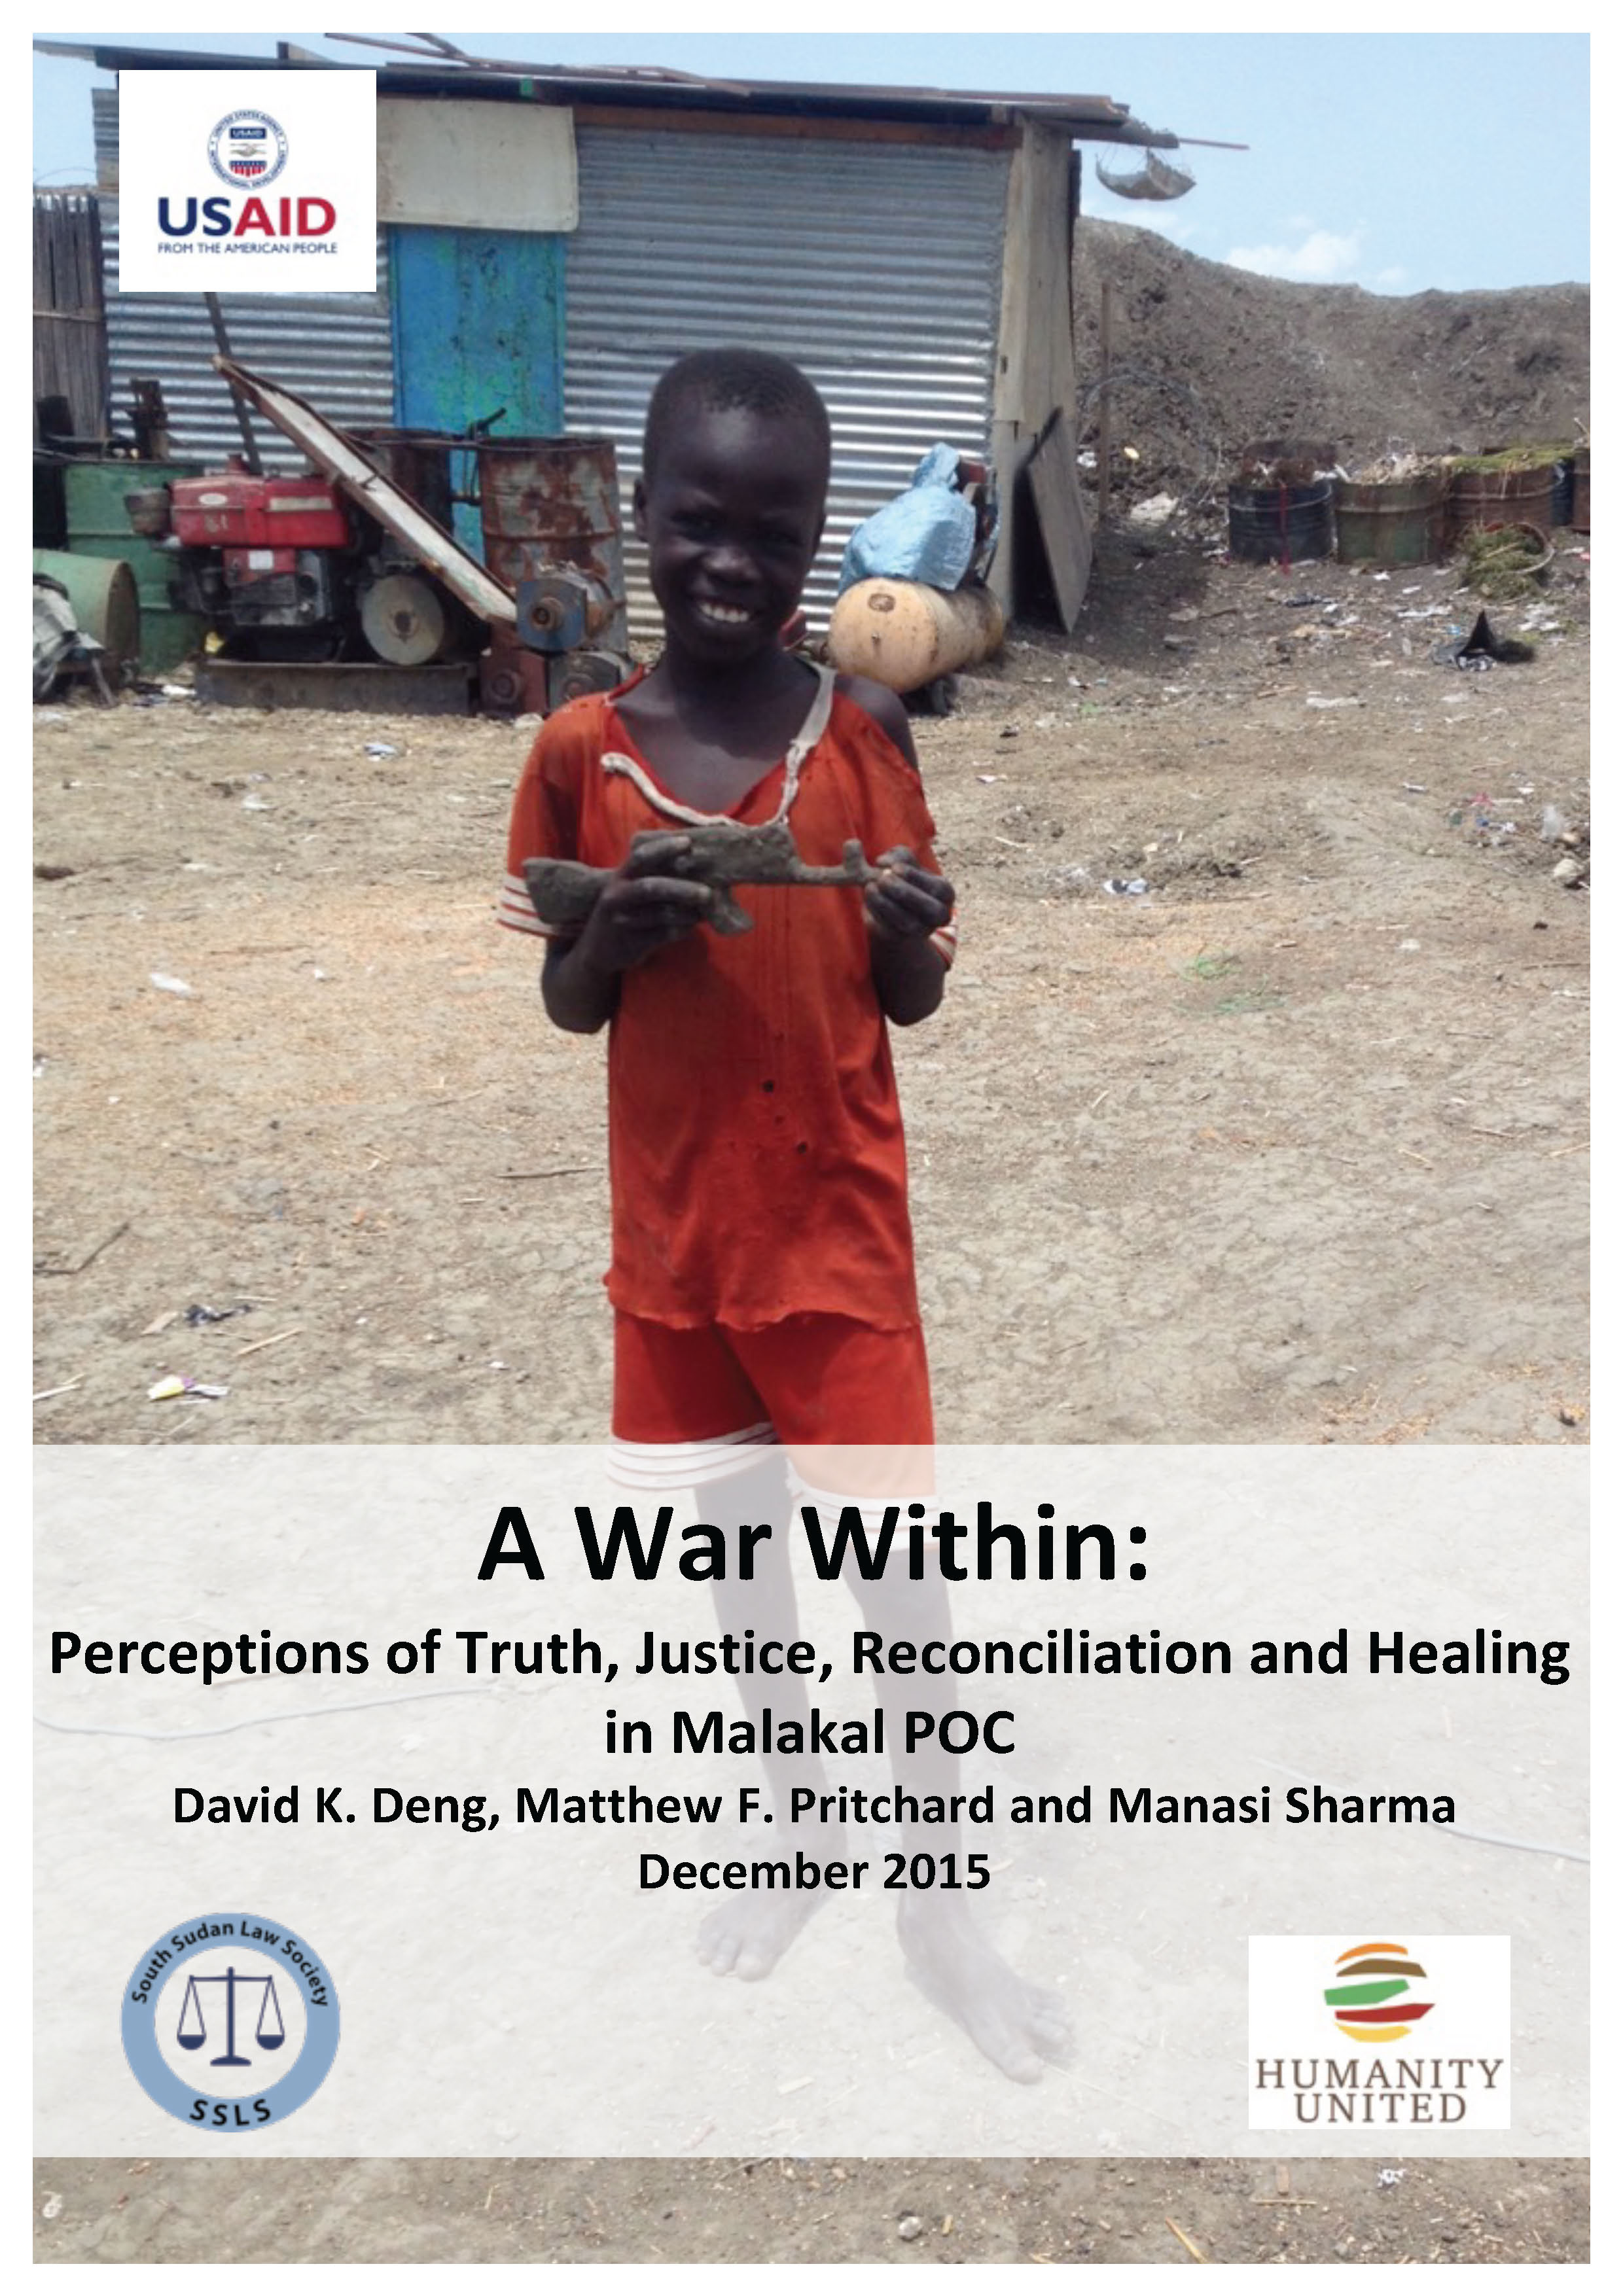 Publication: A War Within, Perceptions of Truth, Justice, Reconciliation and Healing in Malakal PoC